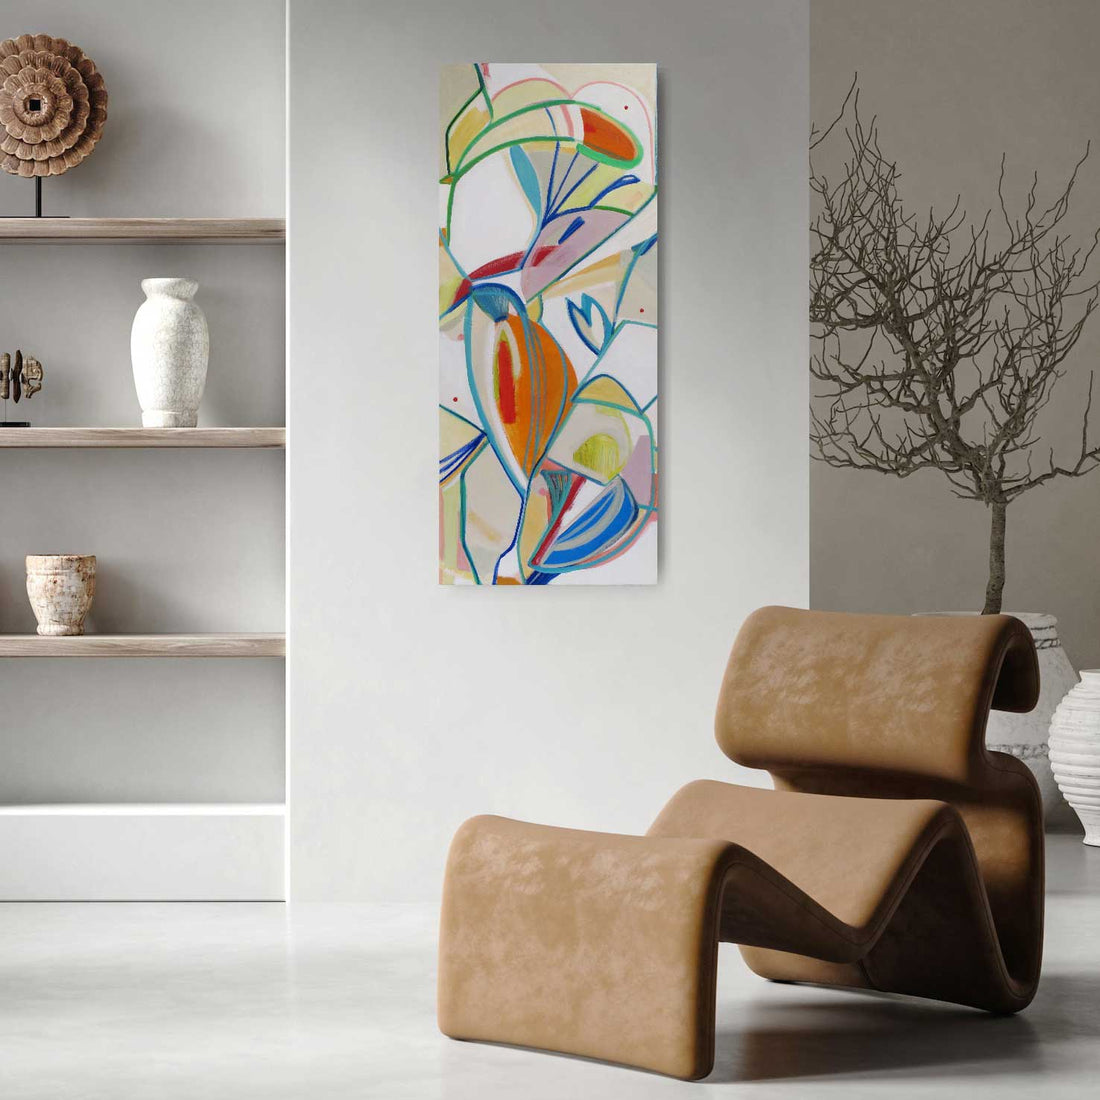 Beetle Boutique, abstract painting by Kirsty Black Studio, viewed in an interior